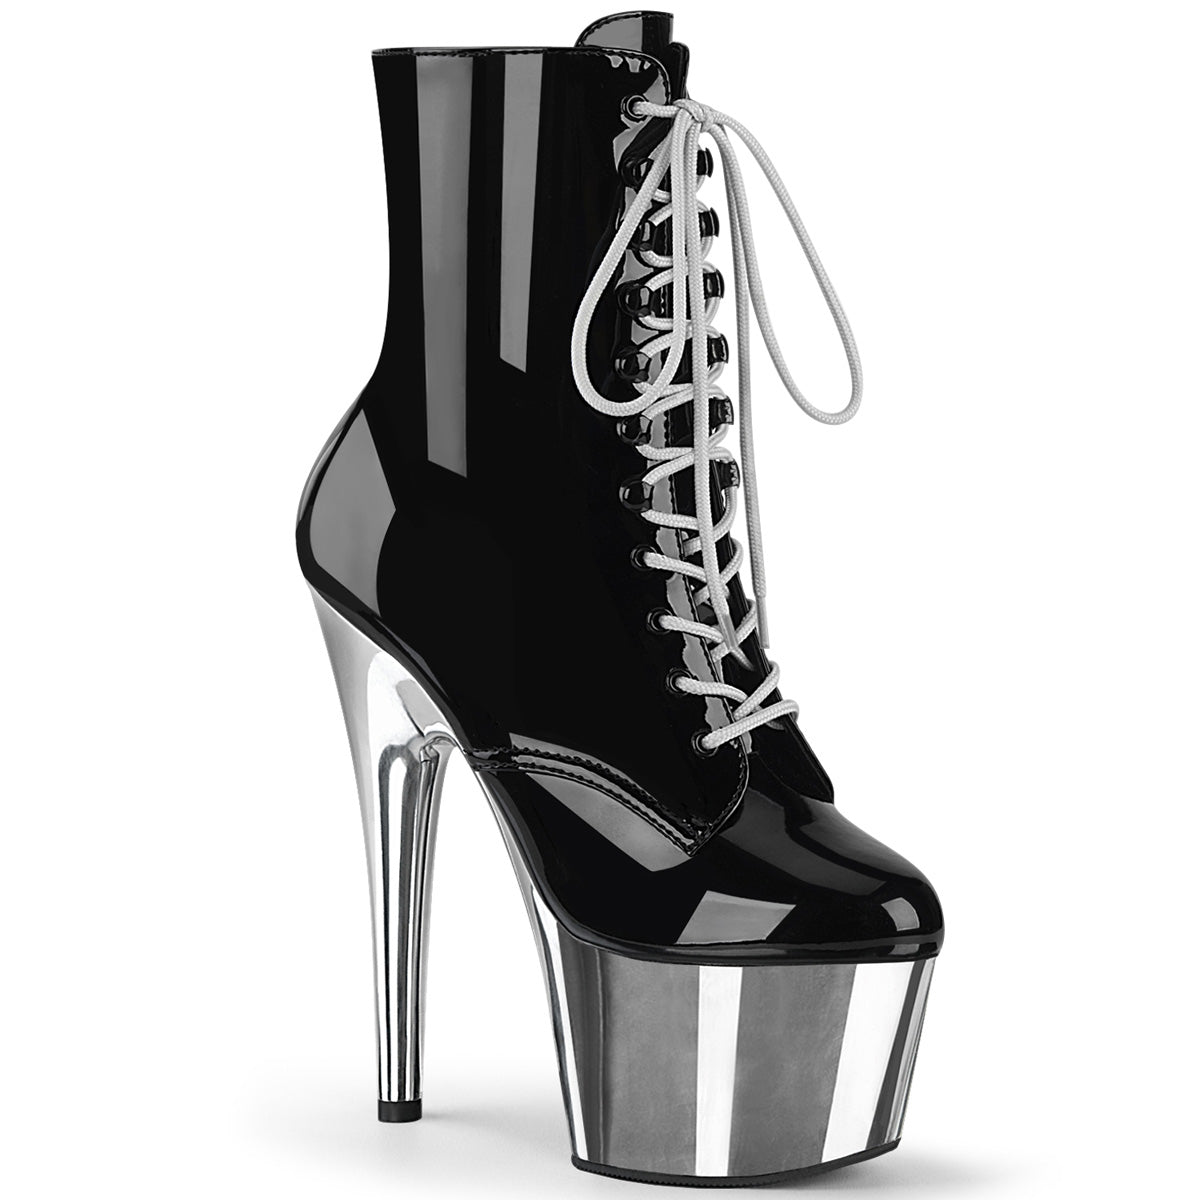 PLEASER ADORE-1020 SILVER CHROME BLACK 7 INCH HIGH HEEL ANKLE BOOTS SIZE 7 USA SALE